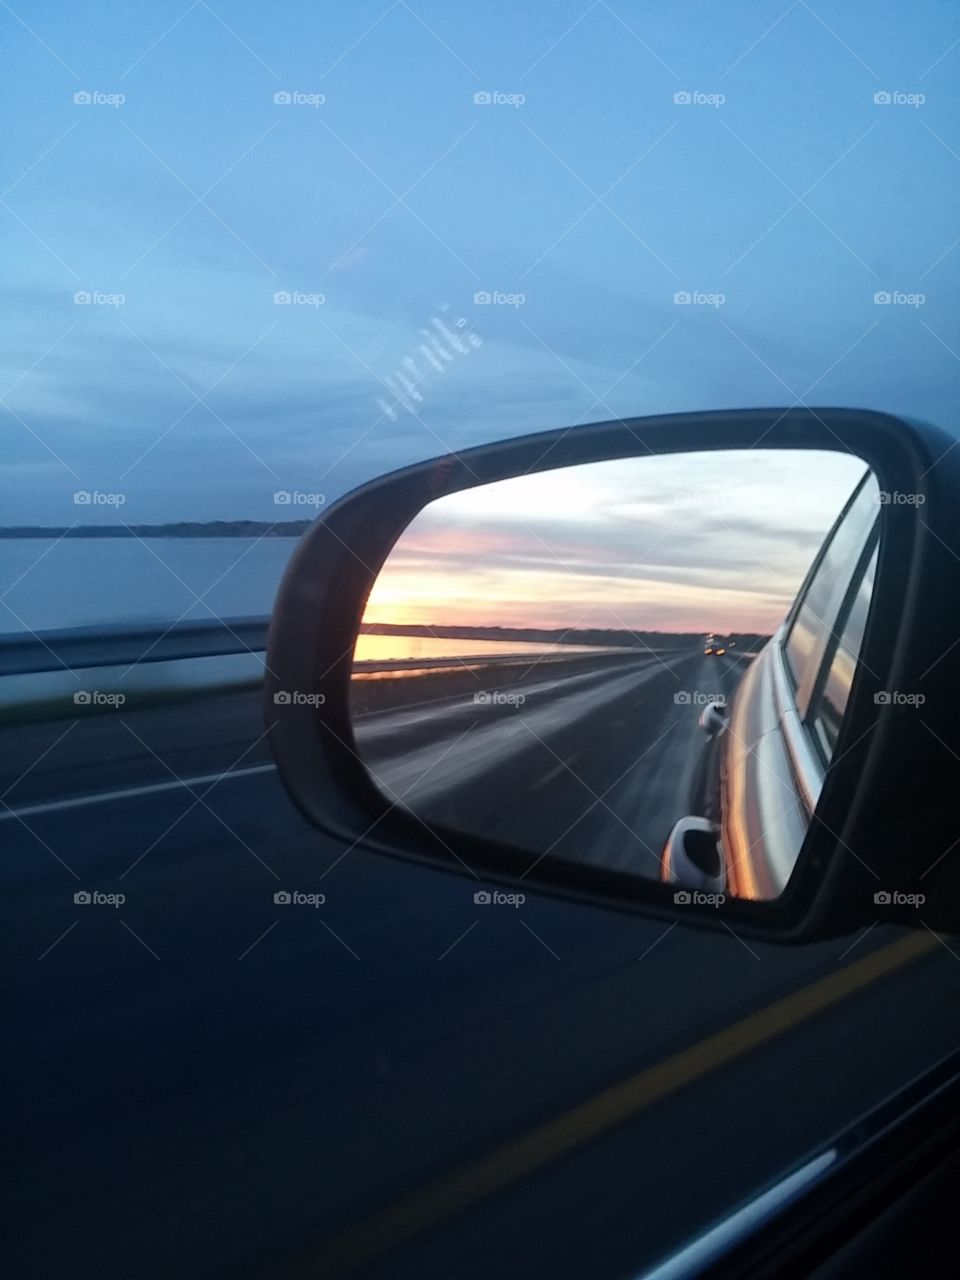 Sunset in the rear view mirror